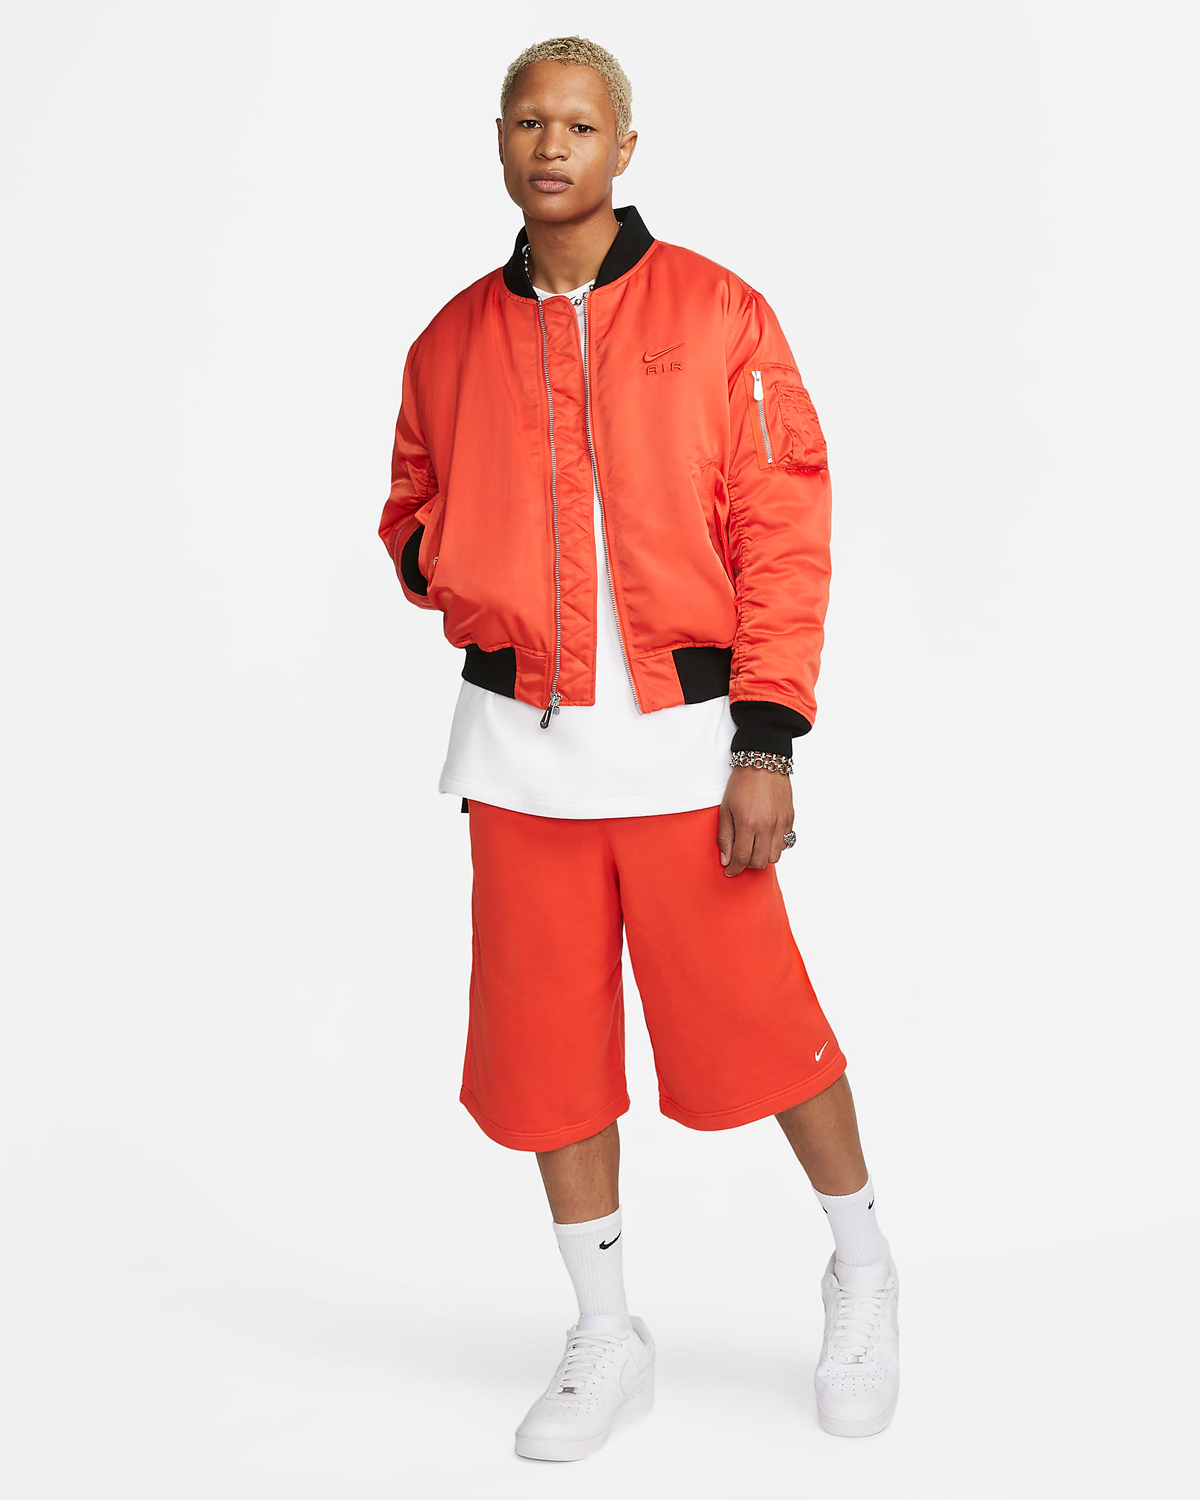 Nike-Sportswear-Picante-Red-Clothing